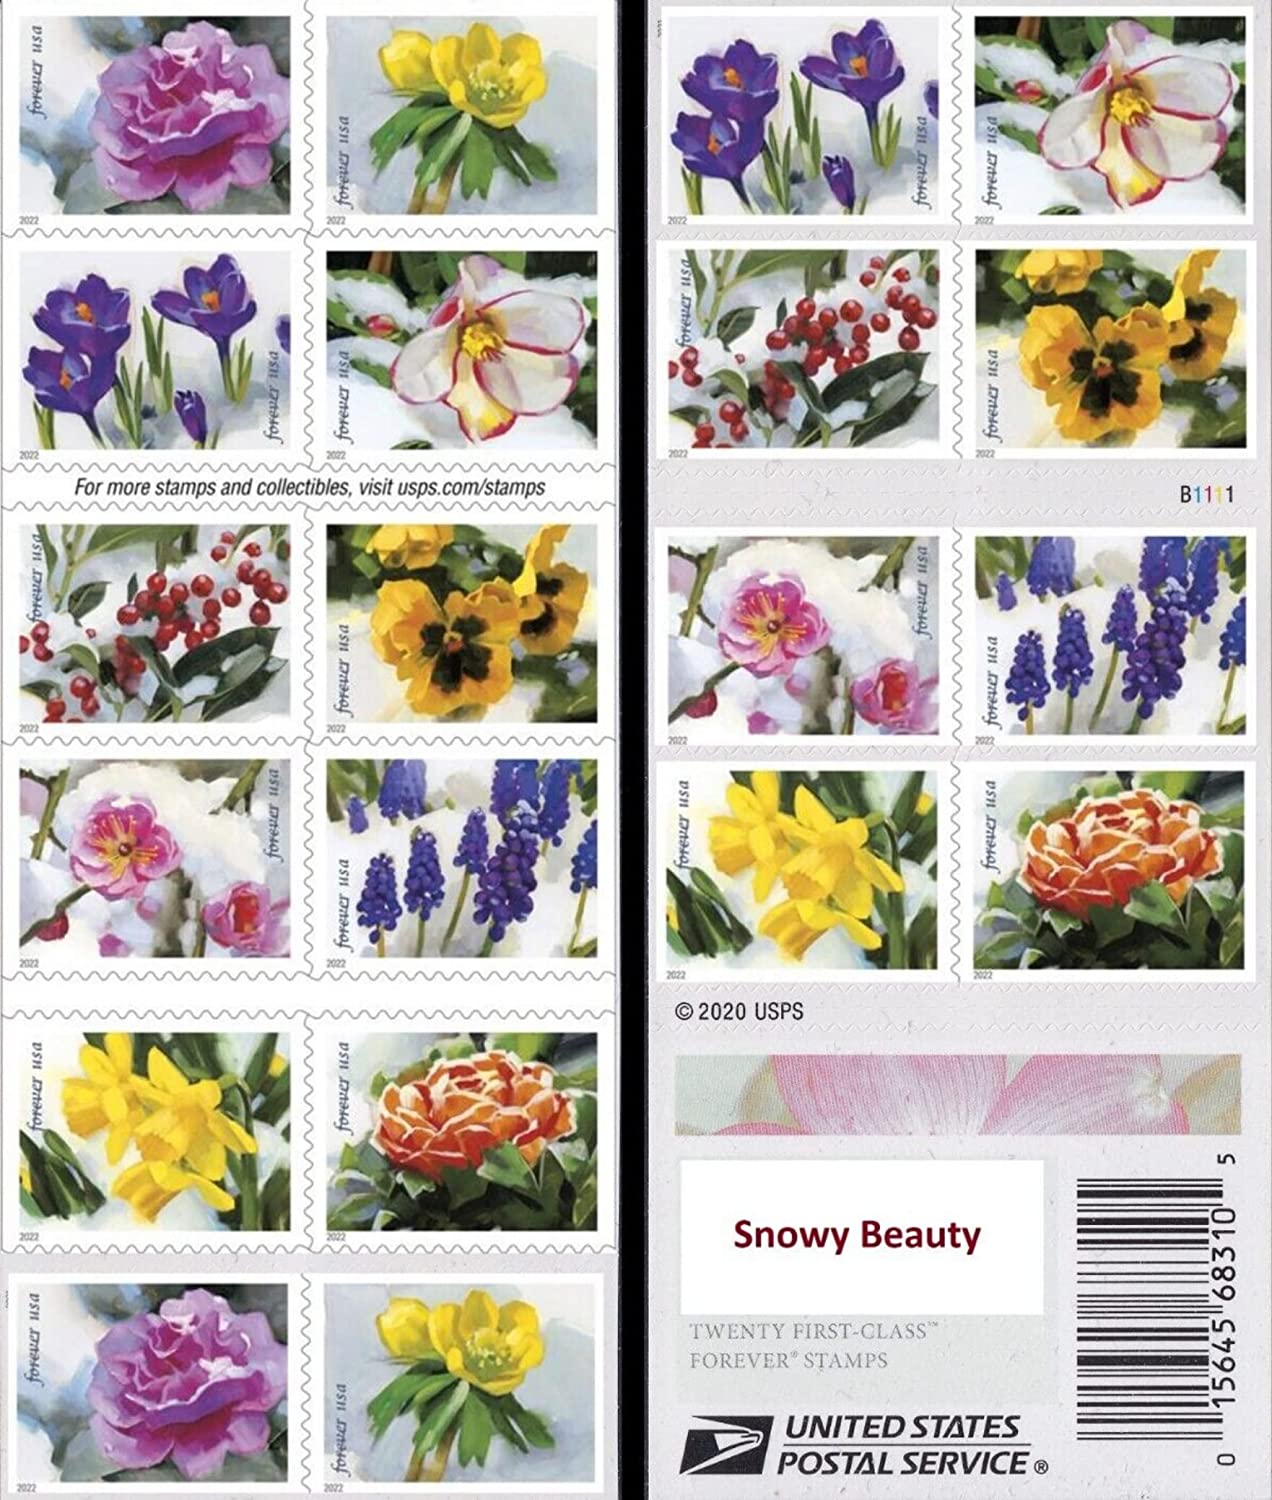 2022 USPS Snowy Garden Beauty Forever Postage Stamps